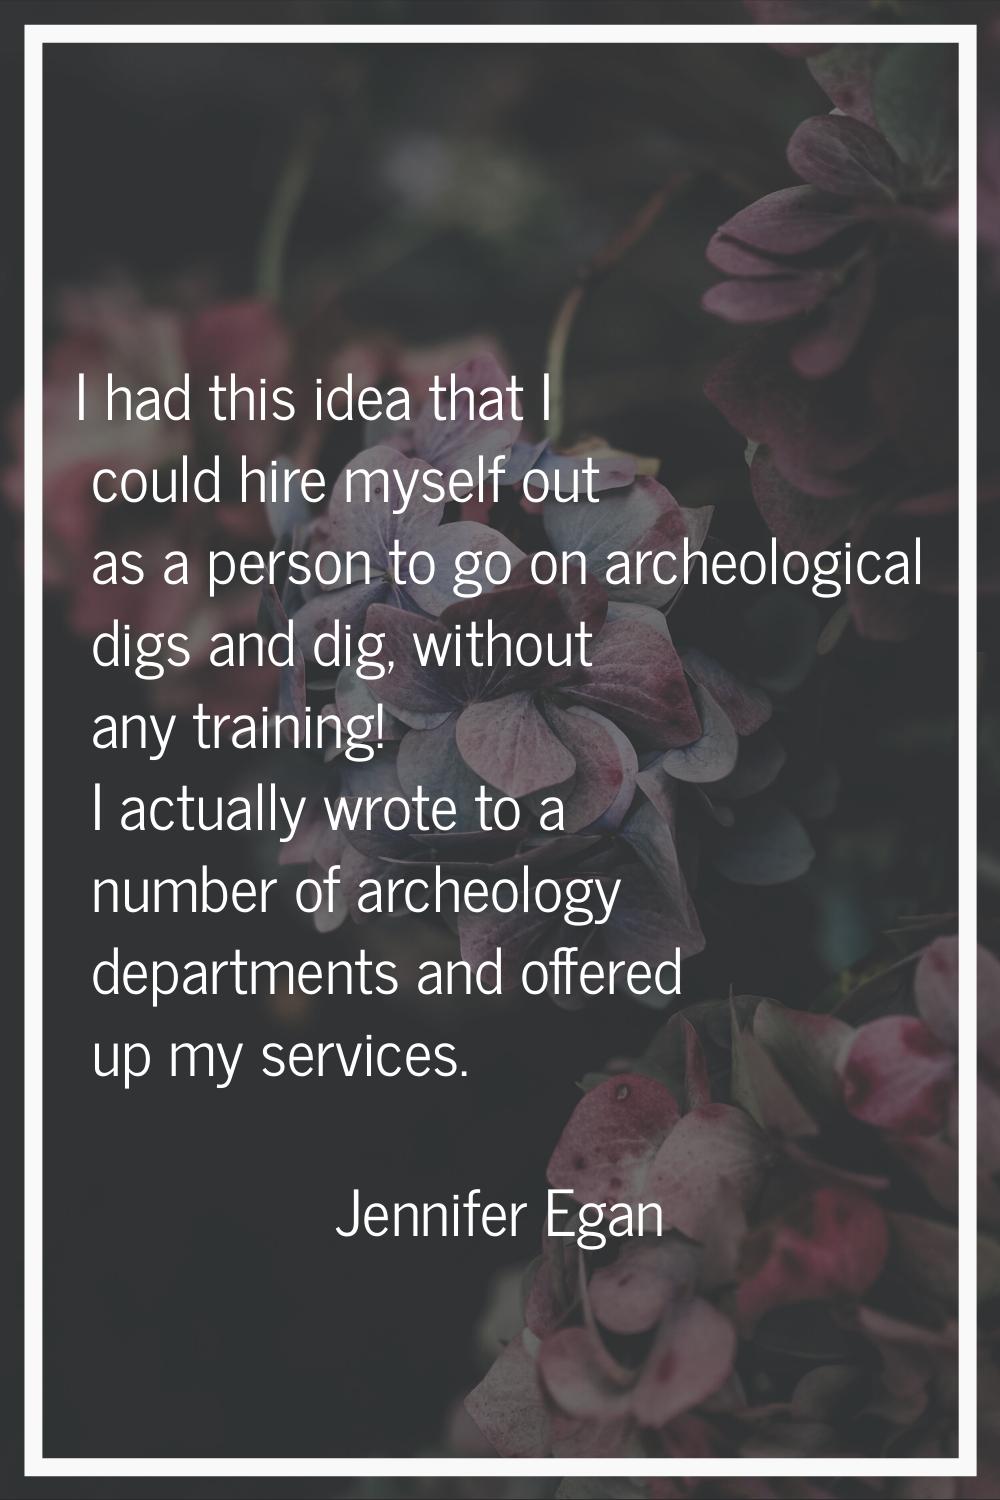 I had this idea that I could hire myself out as a person to go on archeological digs and dig, witho